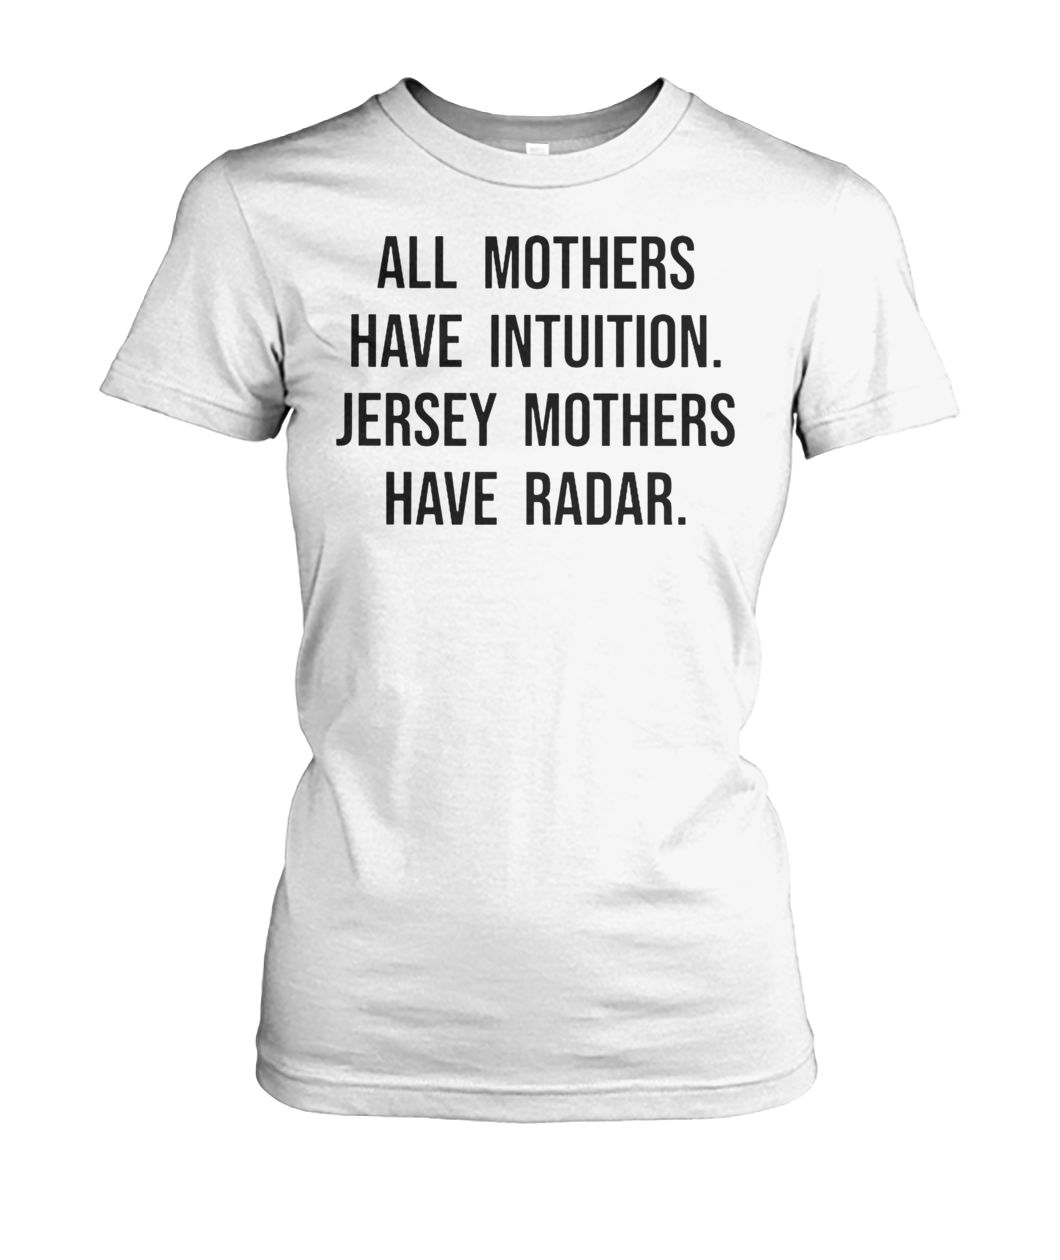 All mothers have intuition jersey mothers have radar women's crew tee